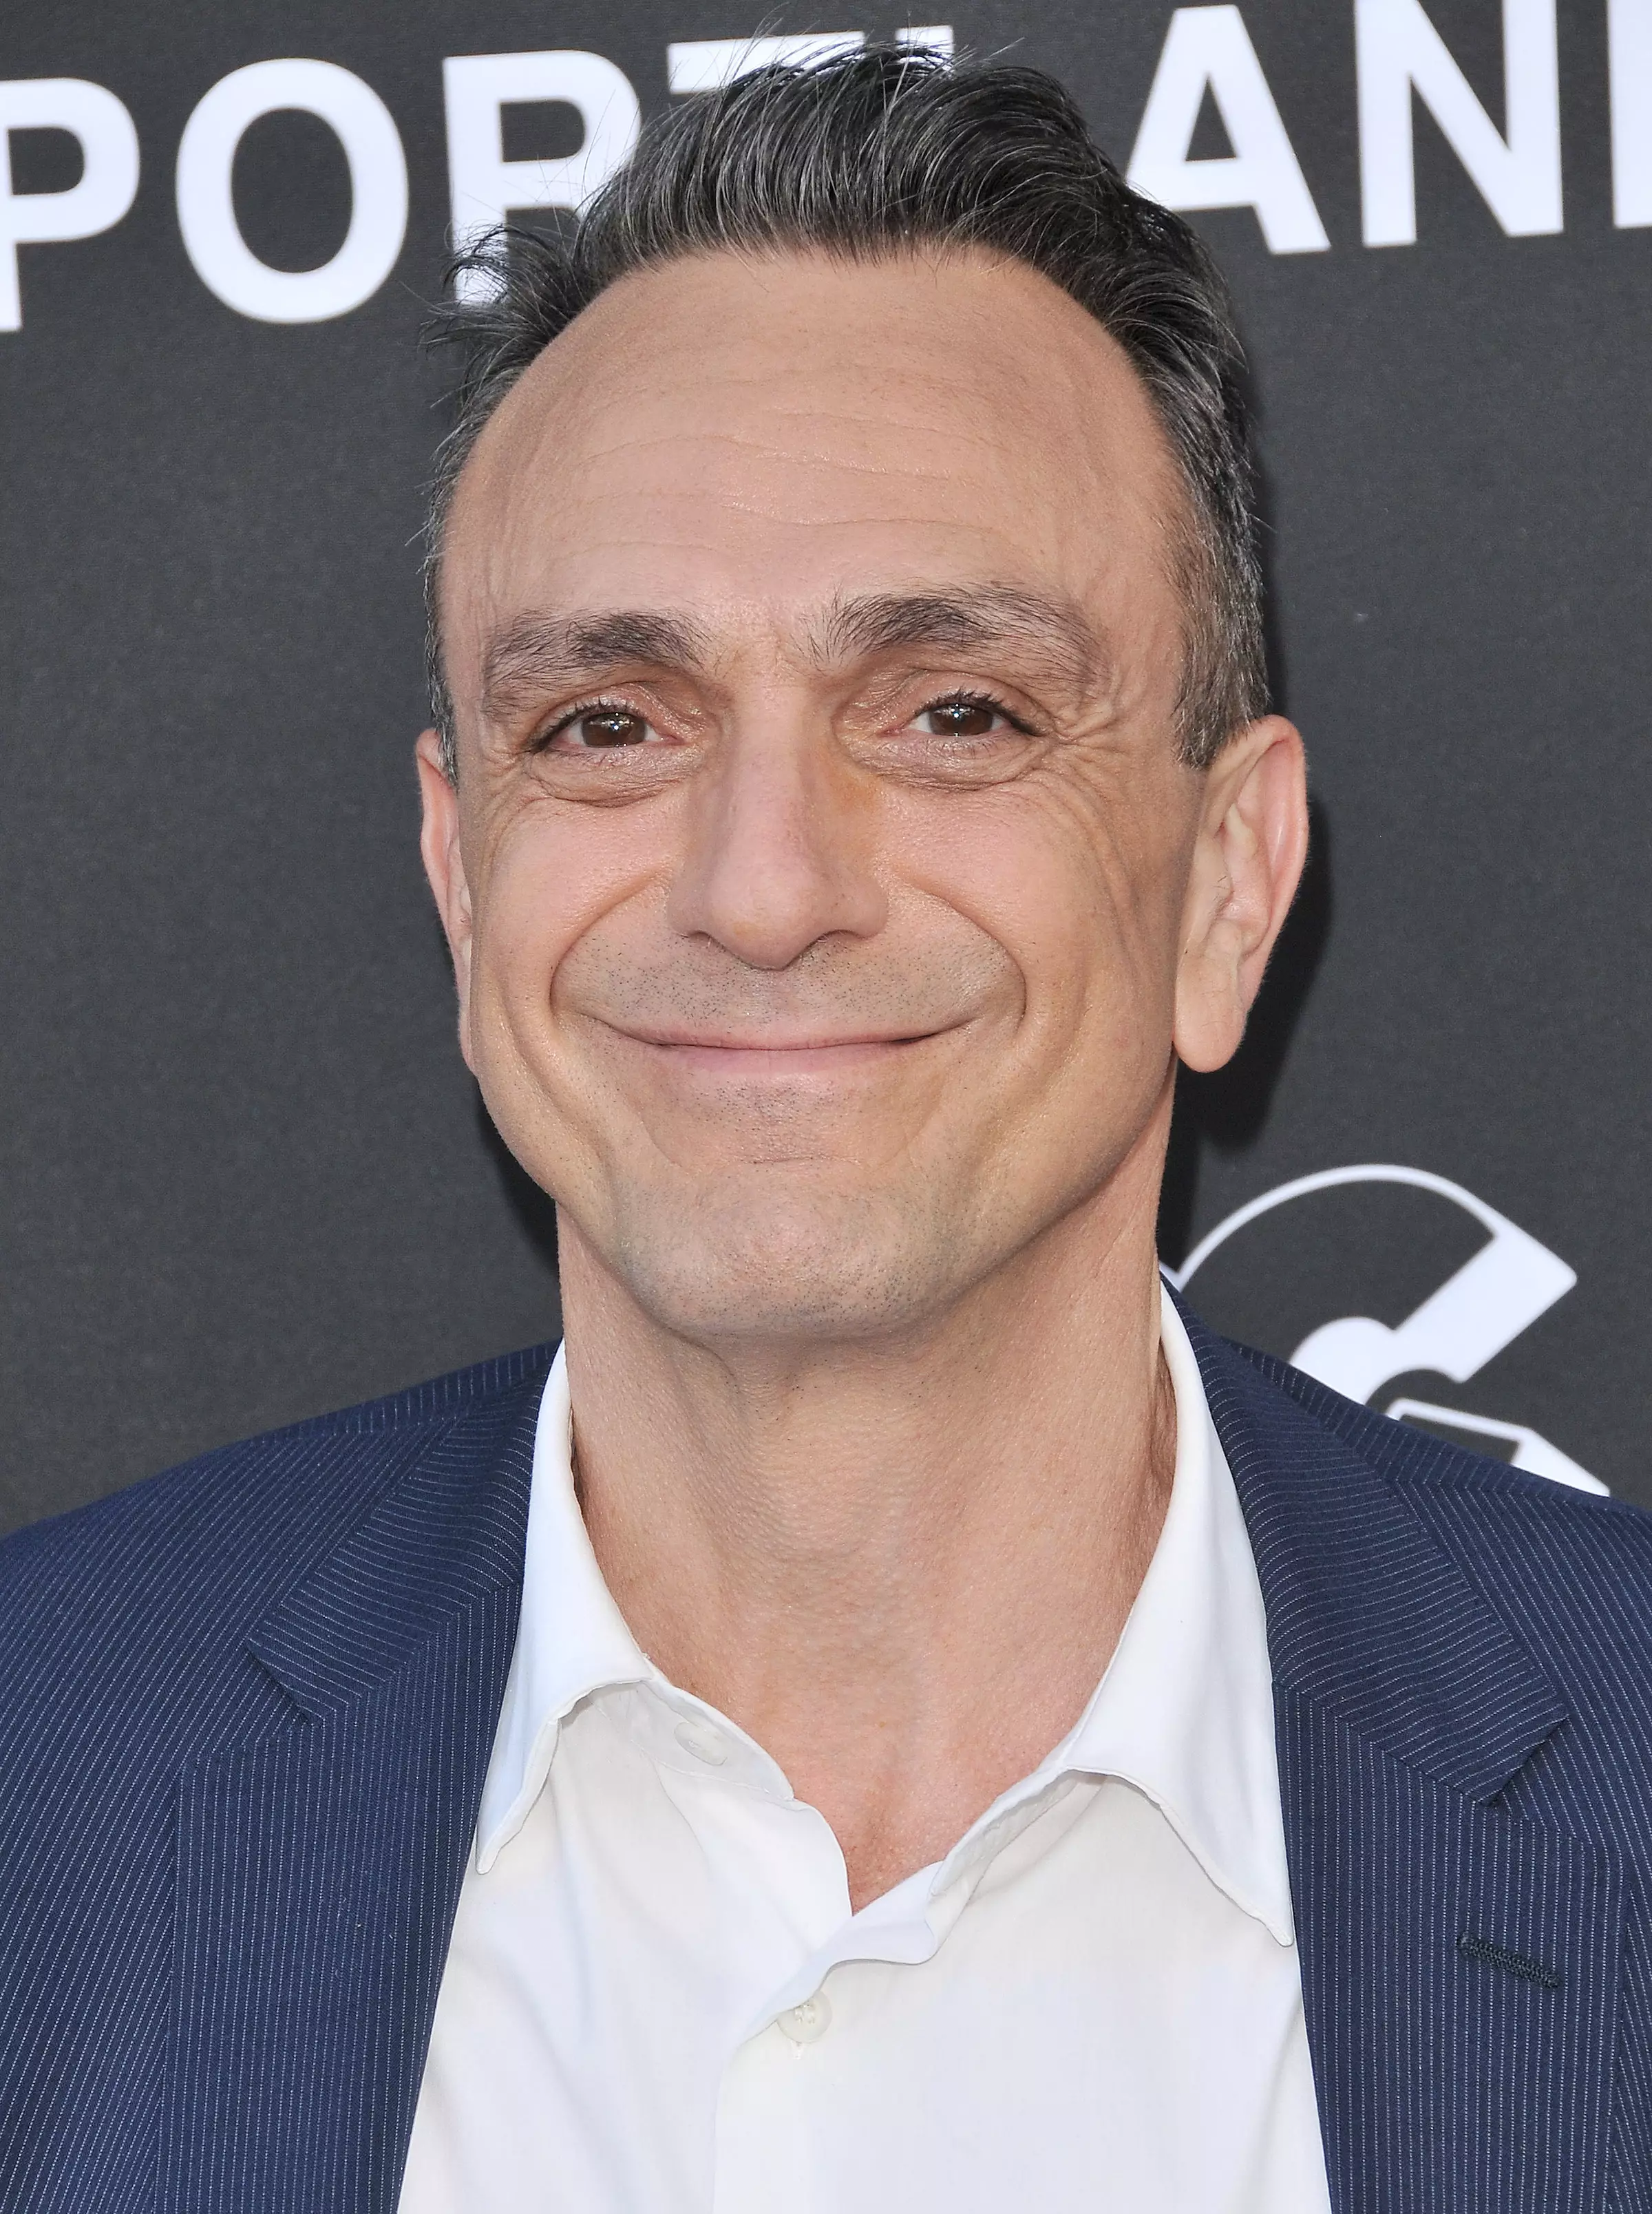 Hank Azaria competed in the tournament and made $10,000 for his charity.